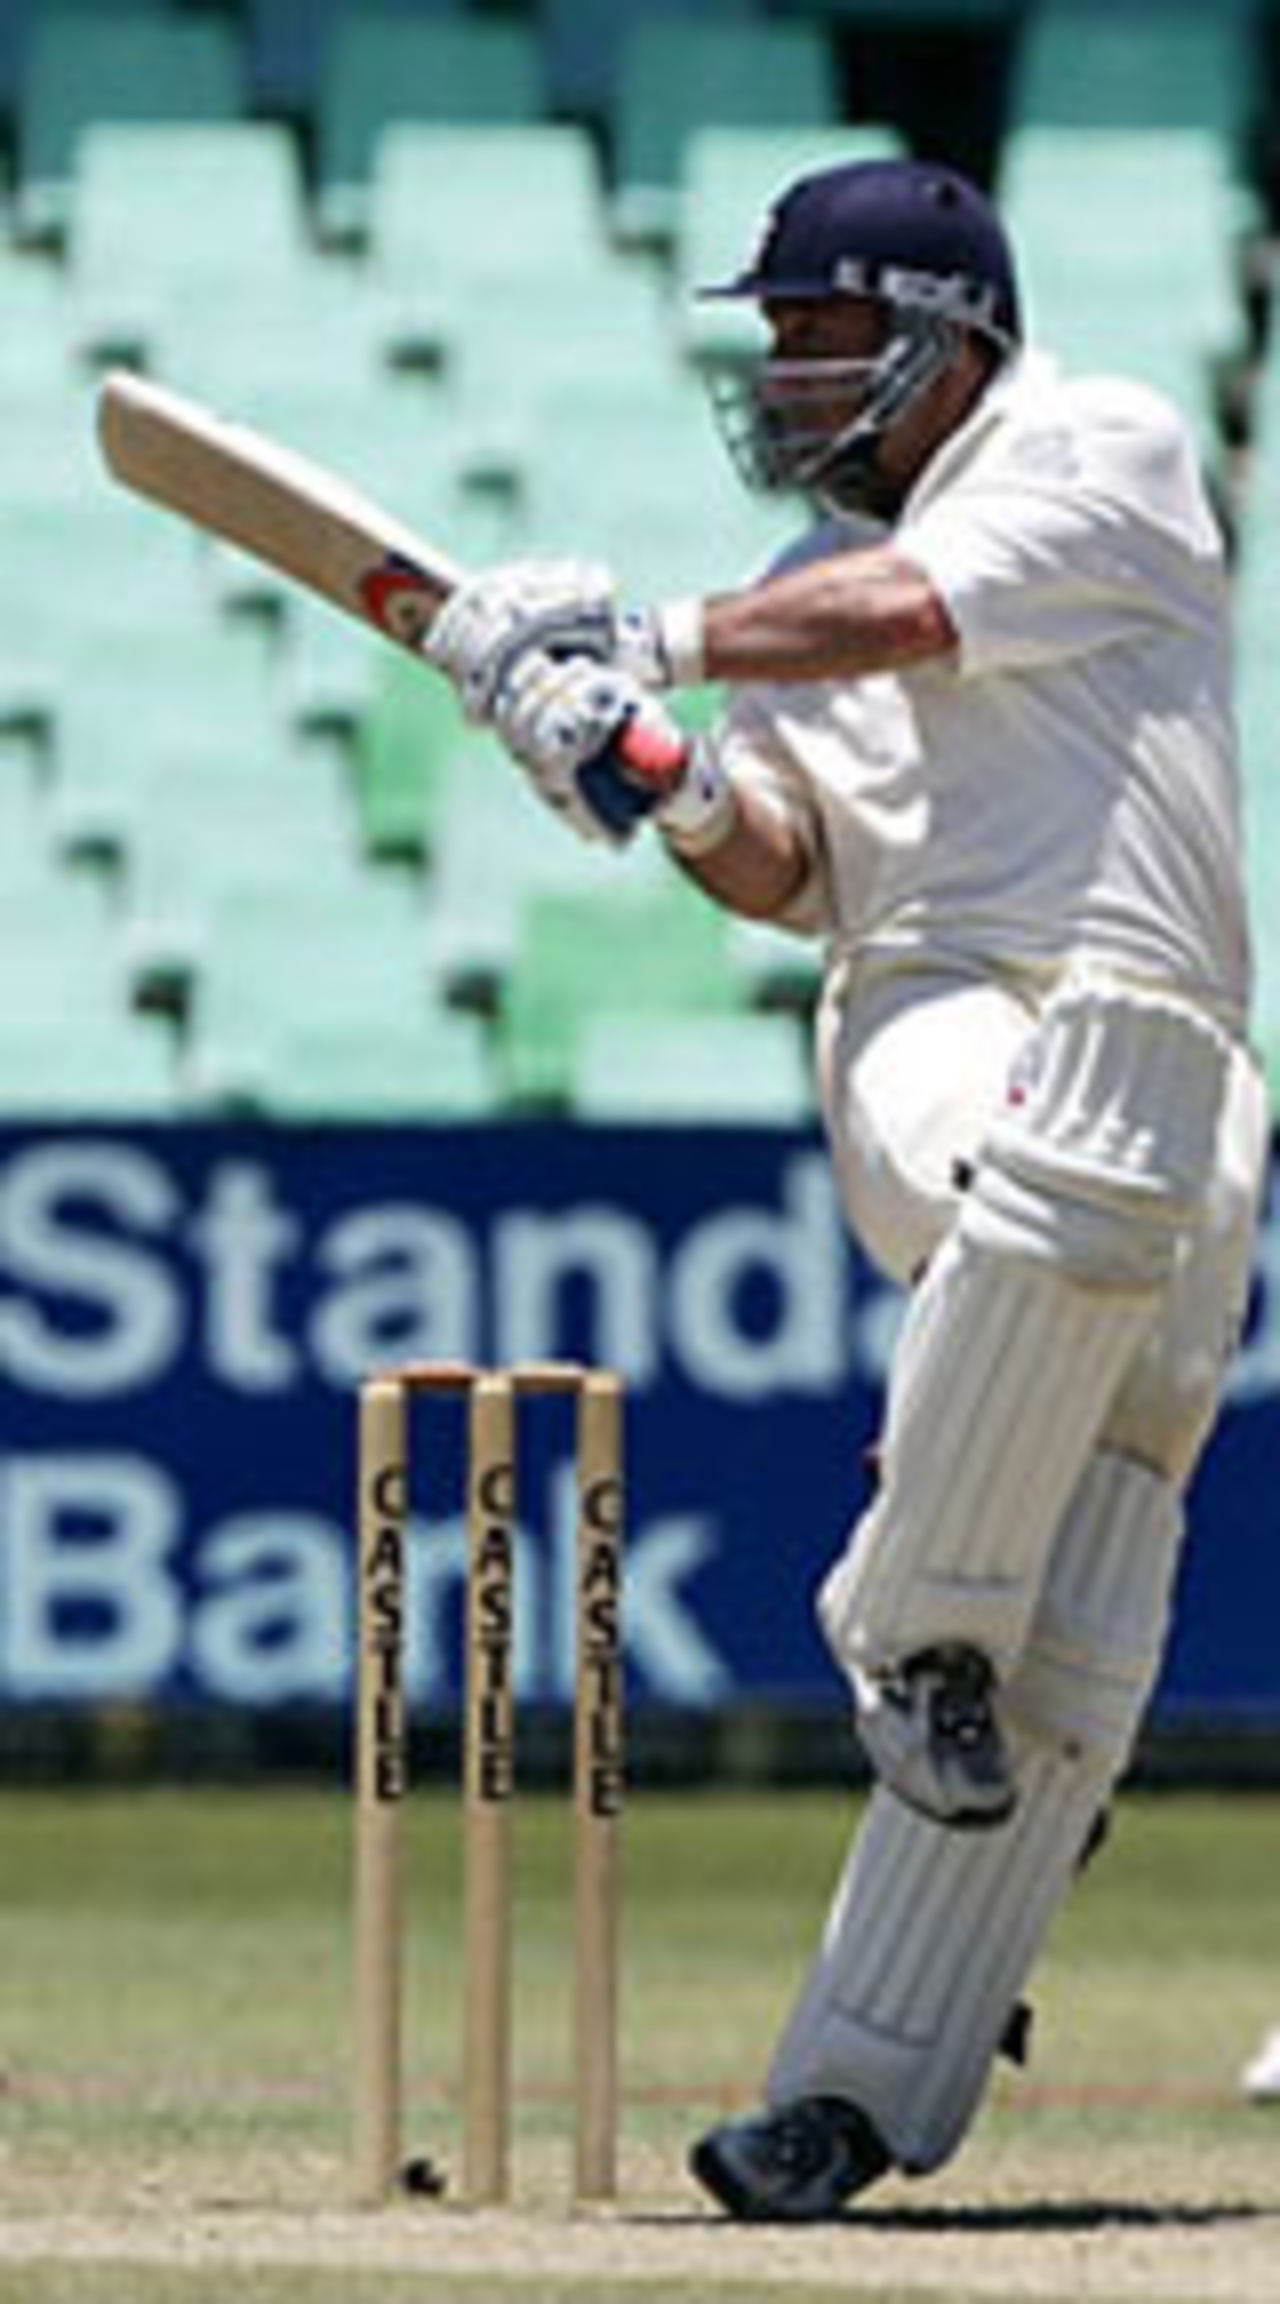 Graham Thorpe on the offensive, South Africa v England, 2nd Test, Durban, 4th day, December 29, 2004